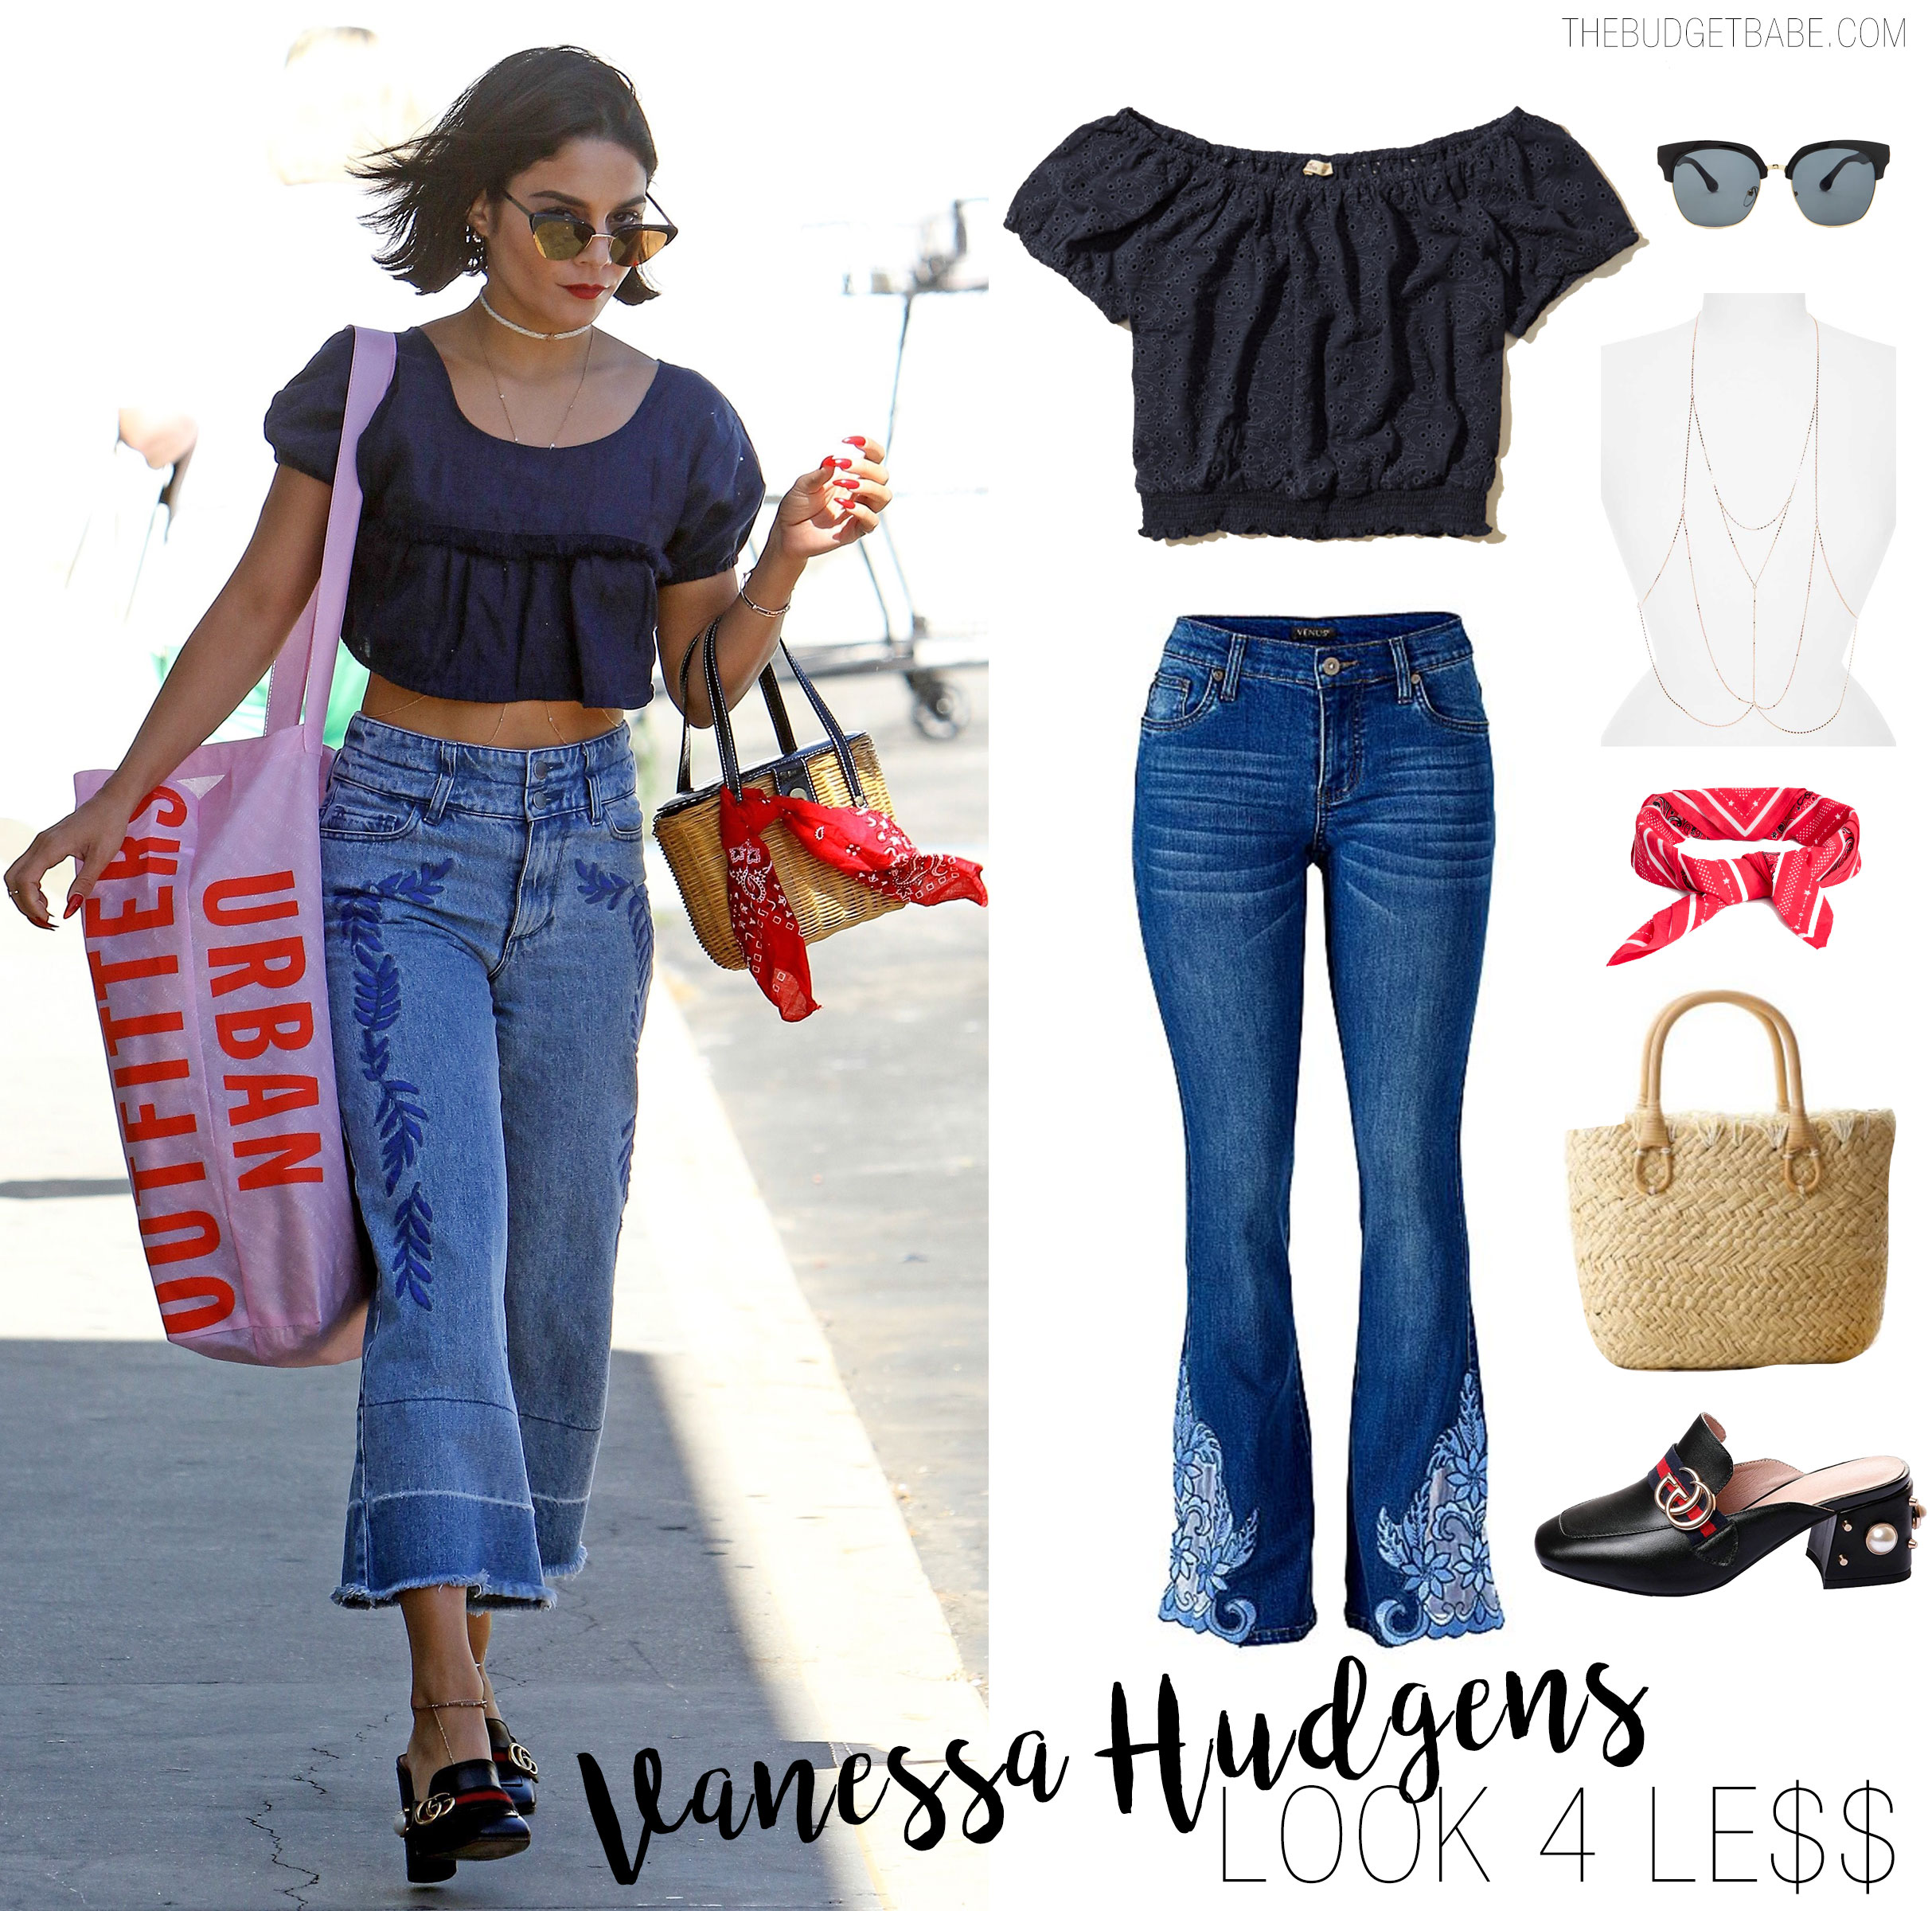 Vanessa Hudgens' shops at Urban Outfitters in a crop top and embroidered flare leg crop jeans.